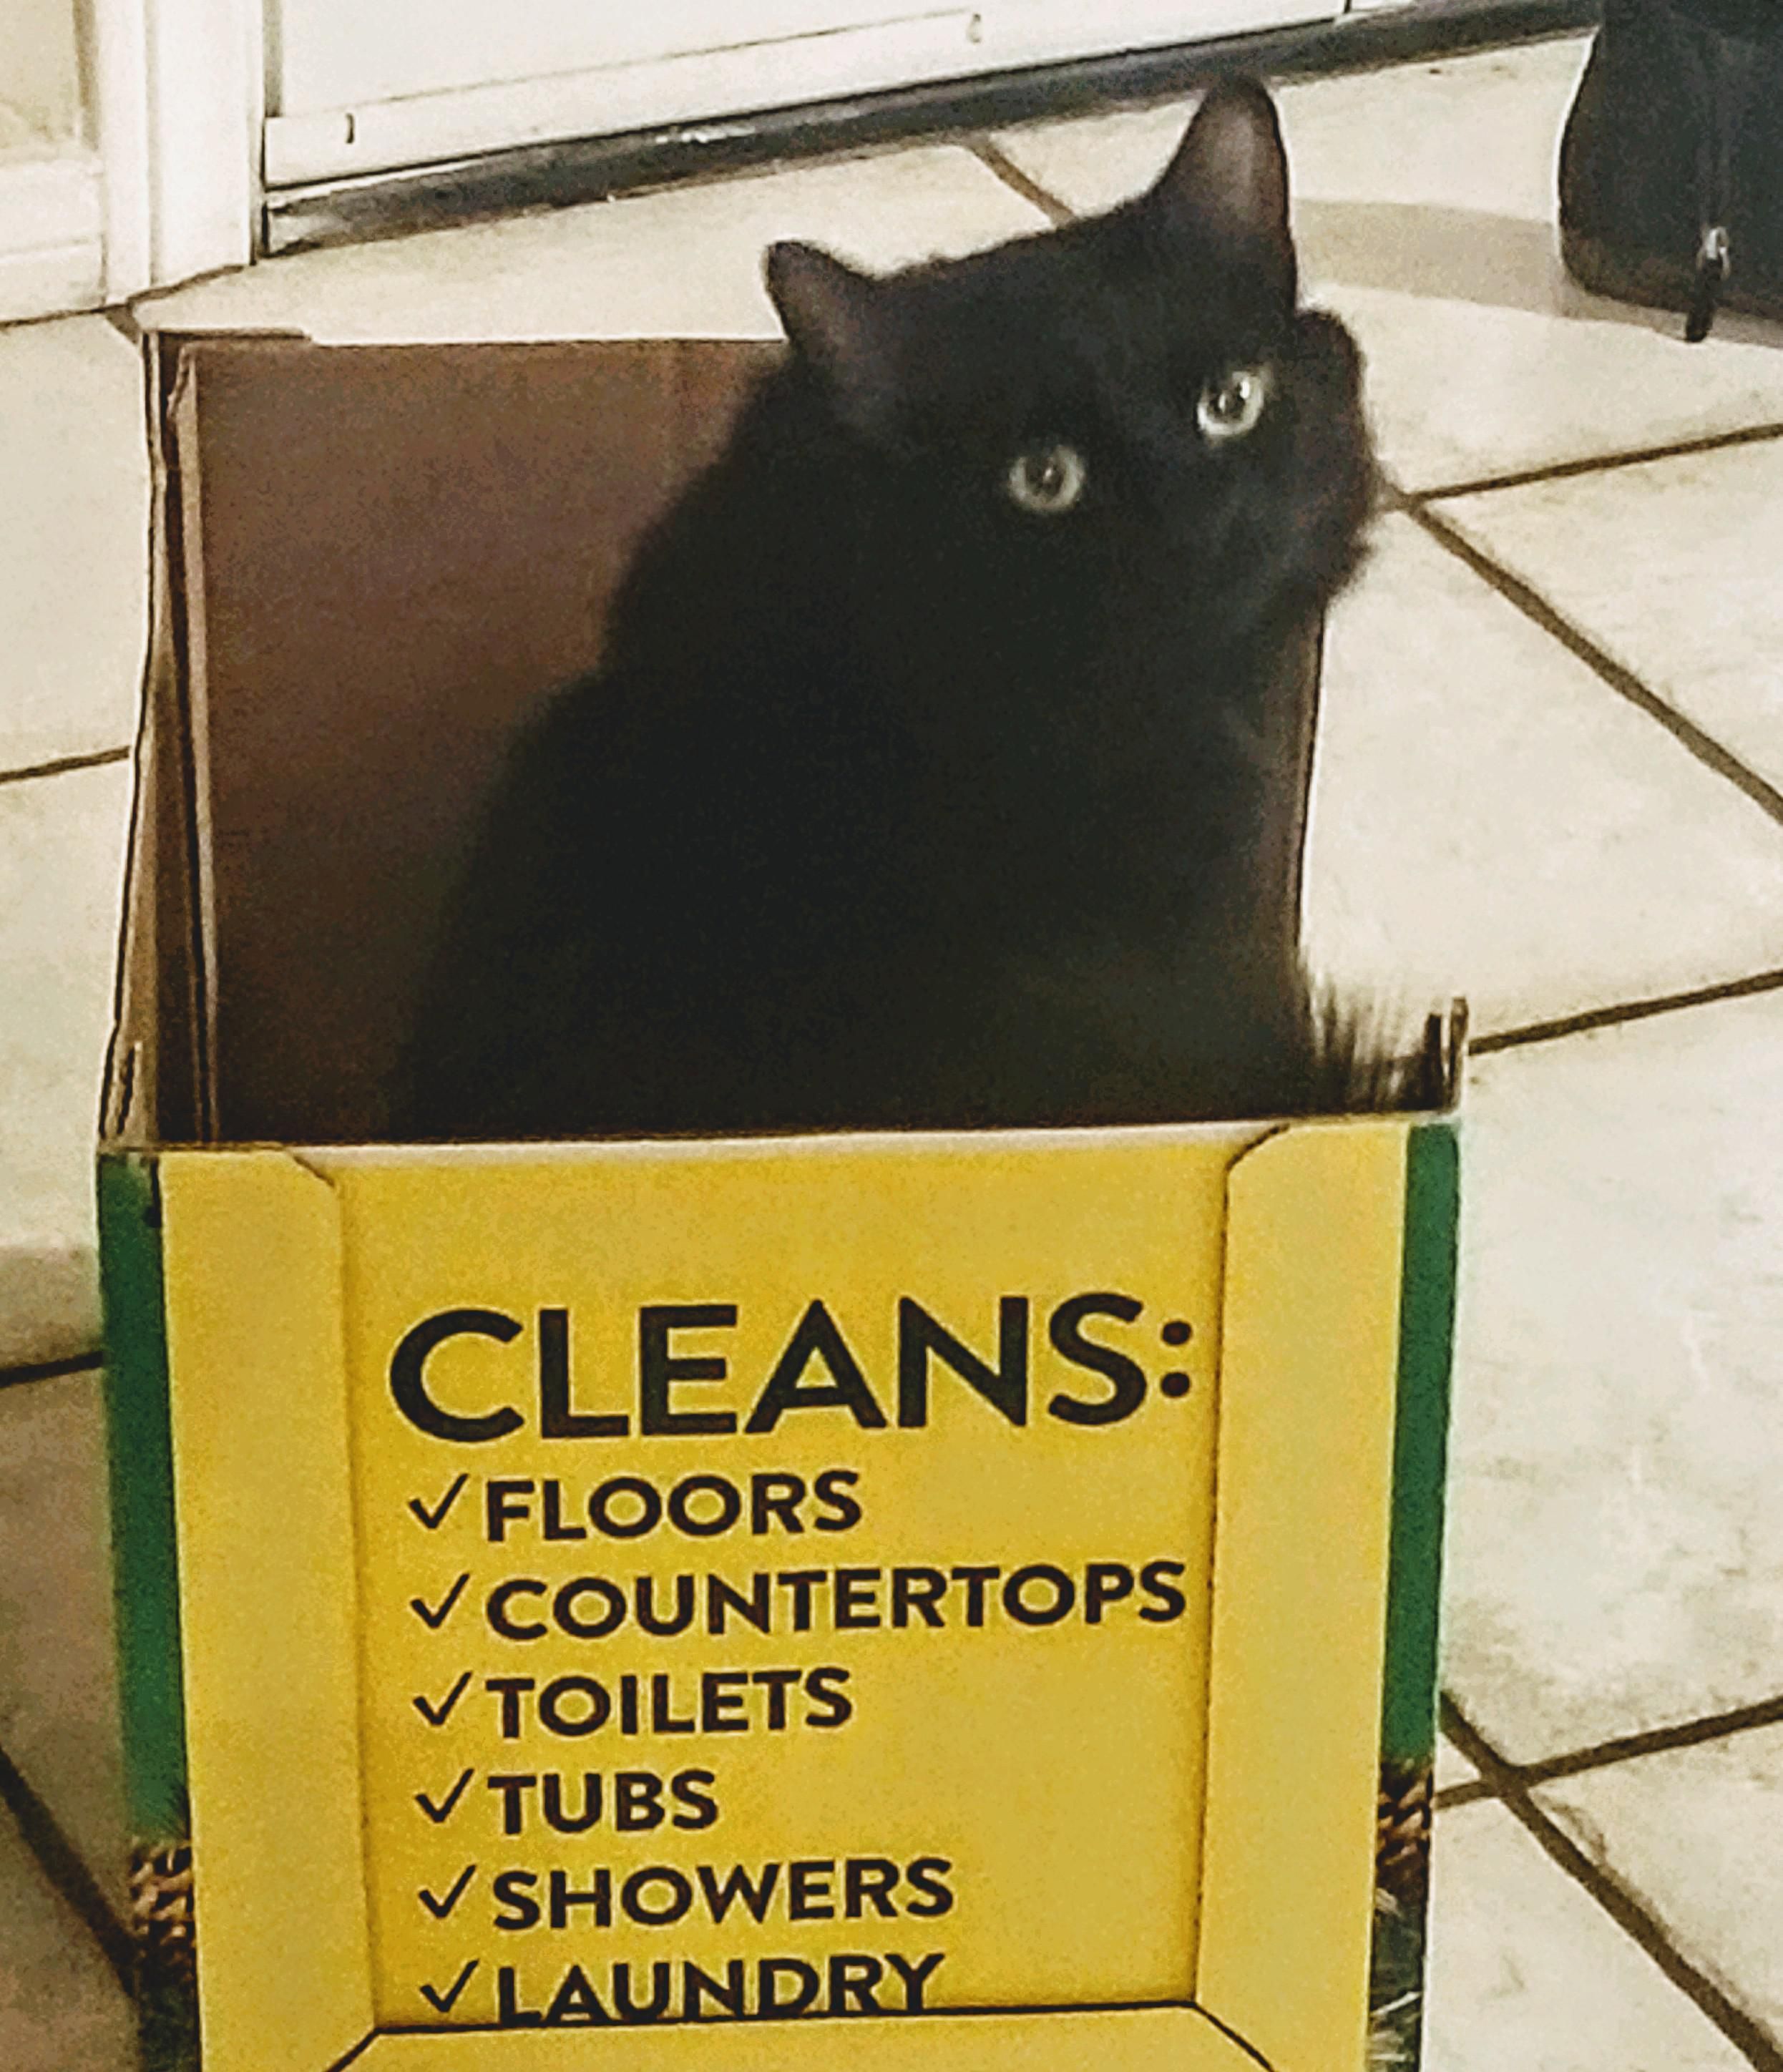 My cat sits in a box of lies.